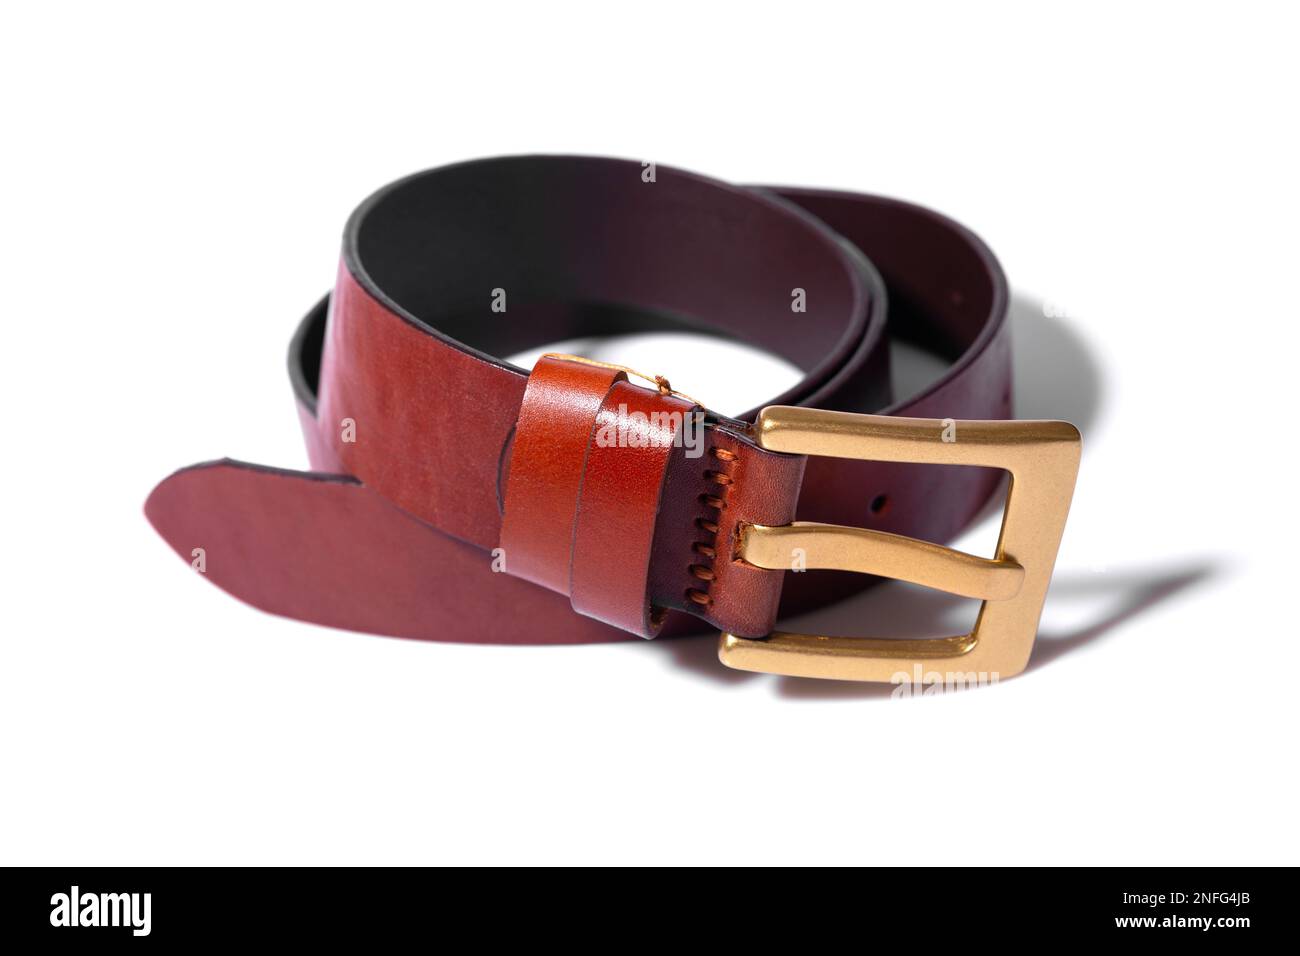 A rolled-up brown leather belt with a metal buckle on a white background is isolated. Place for advertisement, logo, label, mockup, mock-up. Stock Photo